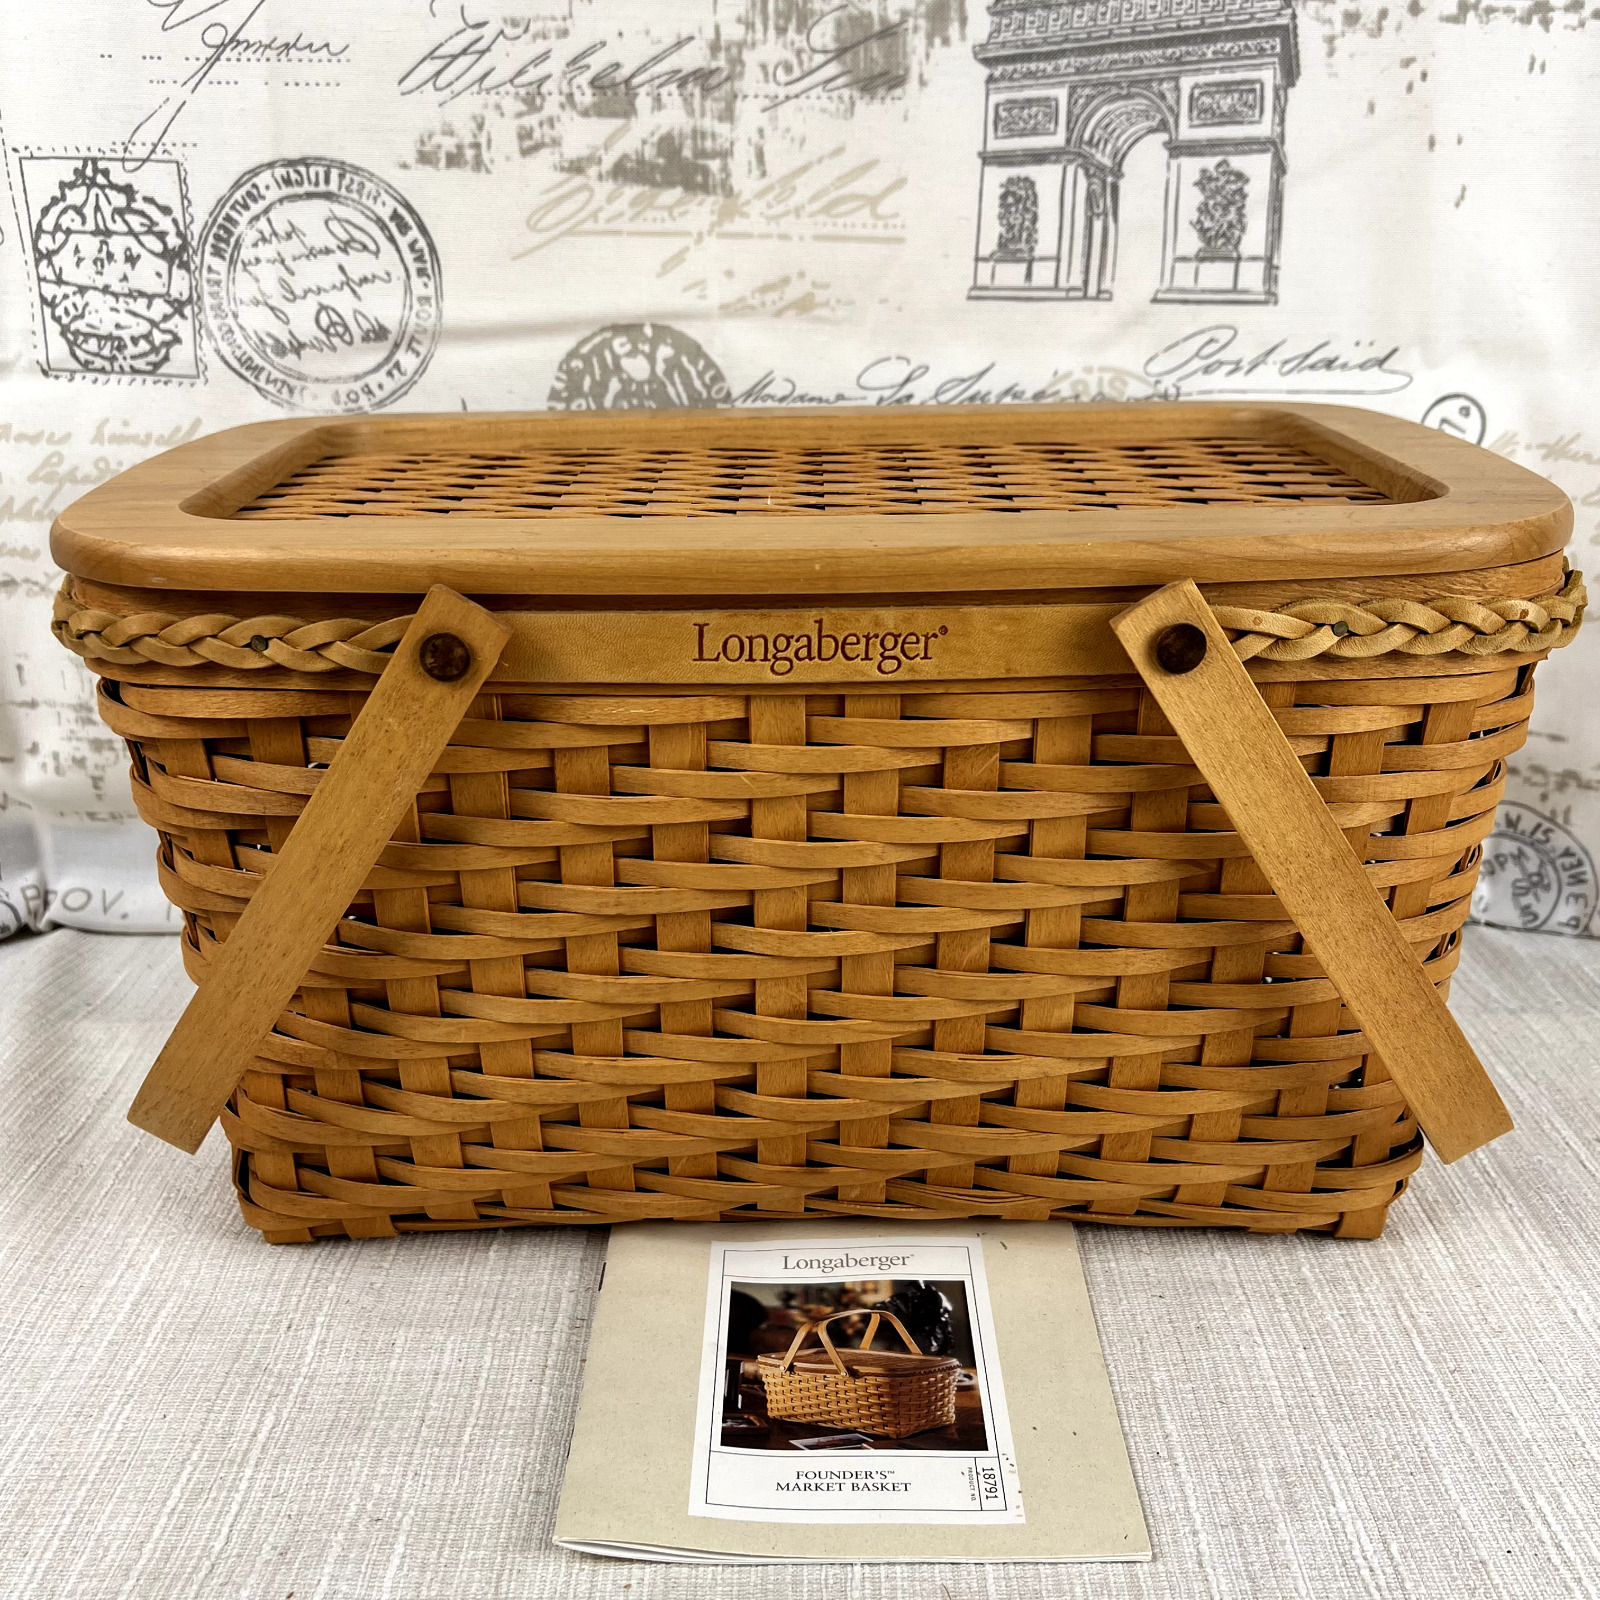 Longaberger 2000 Founders Market Basket with repaired lid 15 x 10 x 7.5